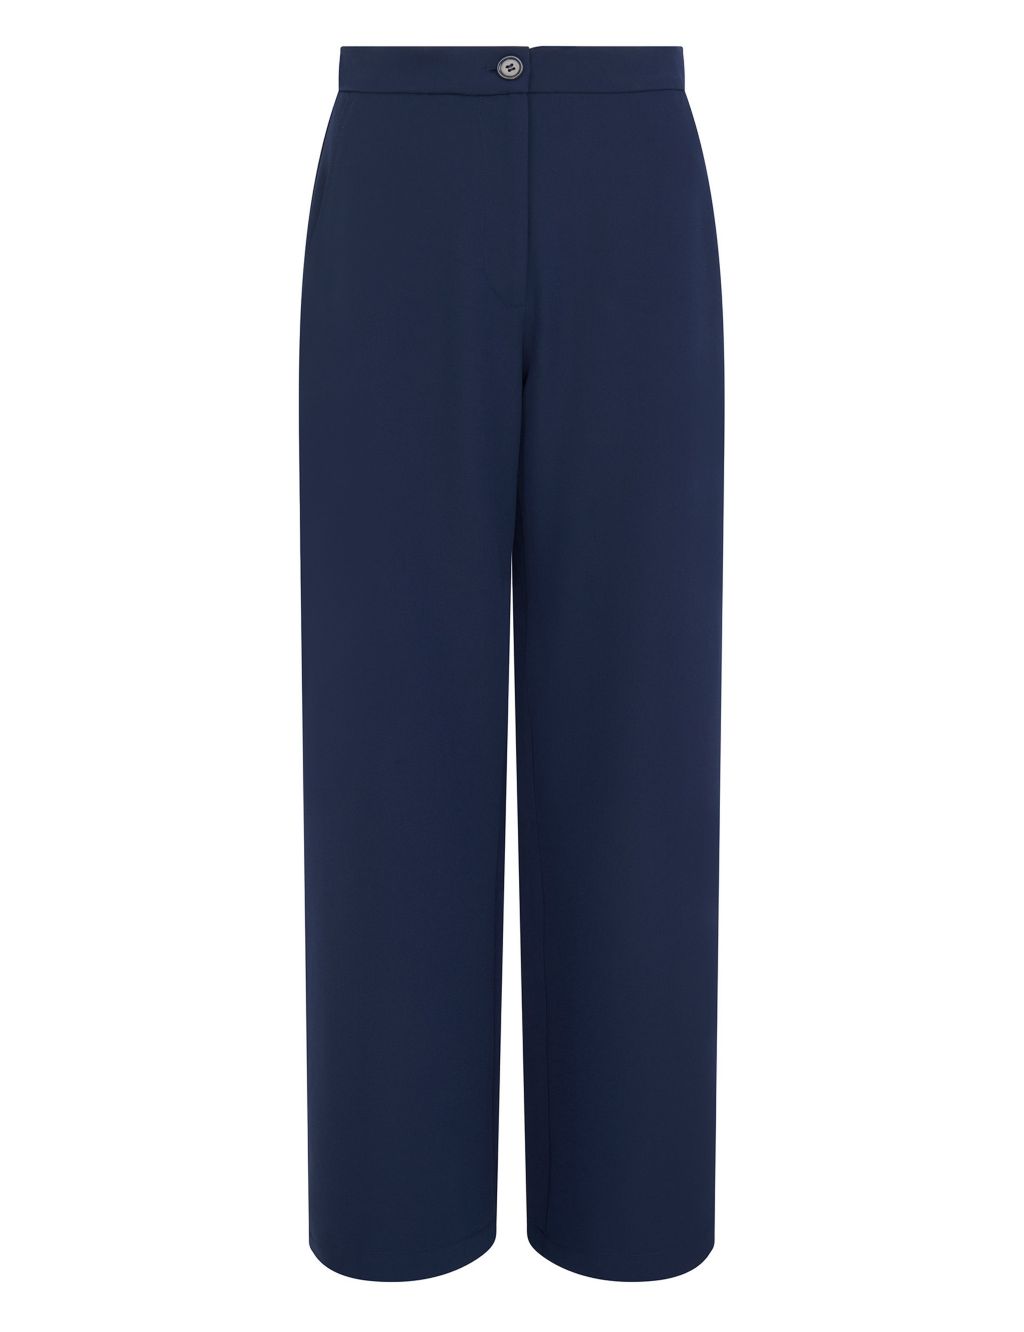 Wide Leg Trousers image 2